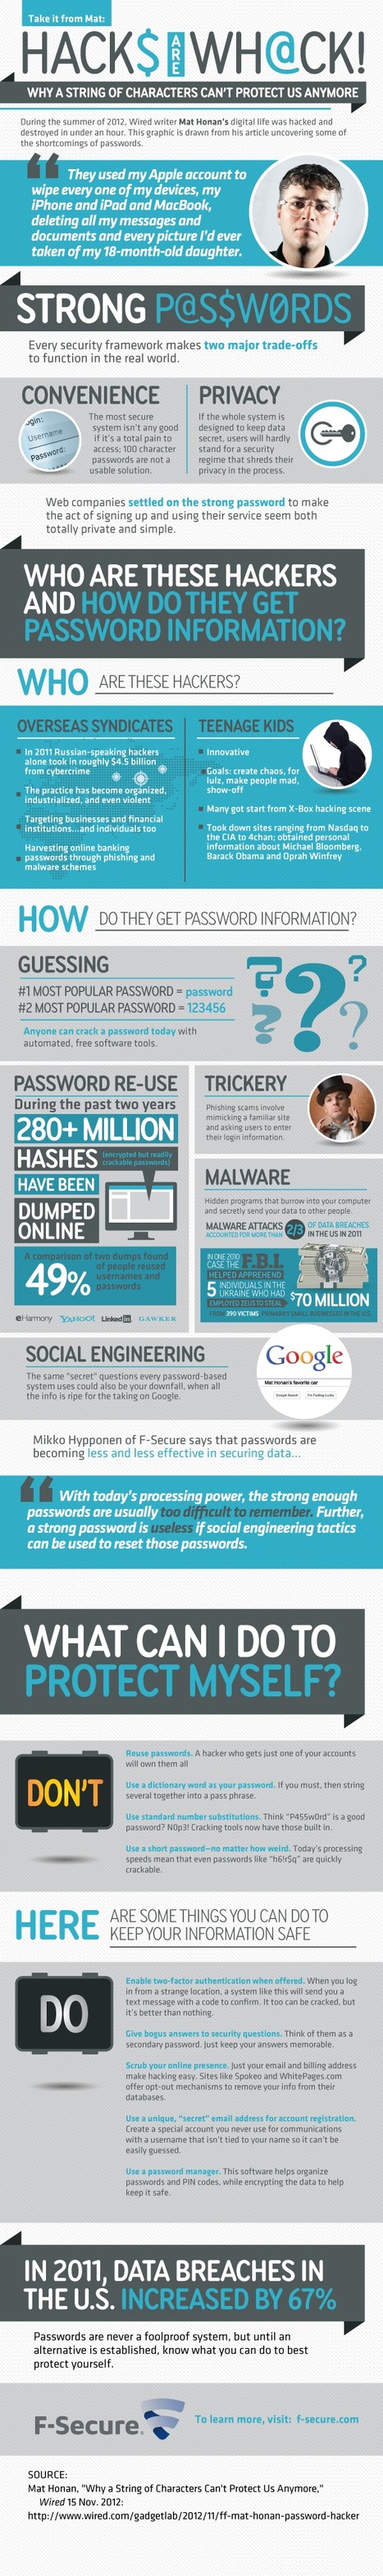 Hacking lessons learned: how to cover your digital ass [Infographic] | Didactics and Technology in Education | Scoop.it